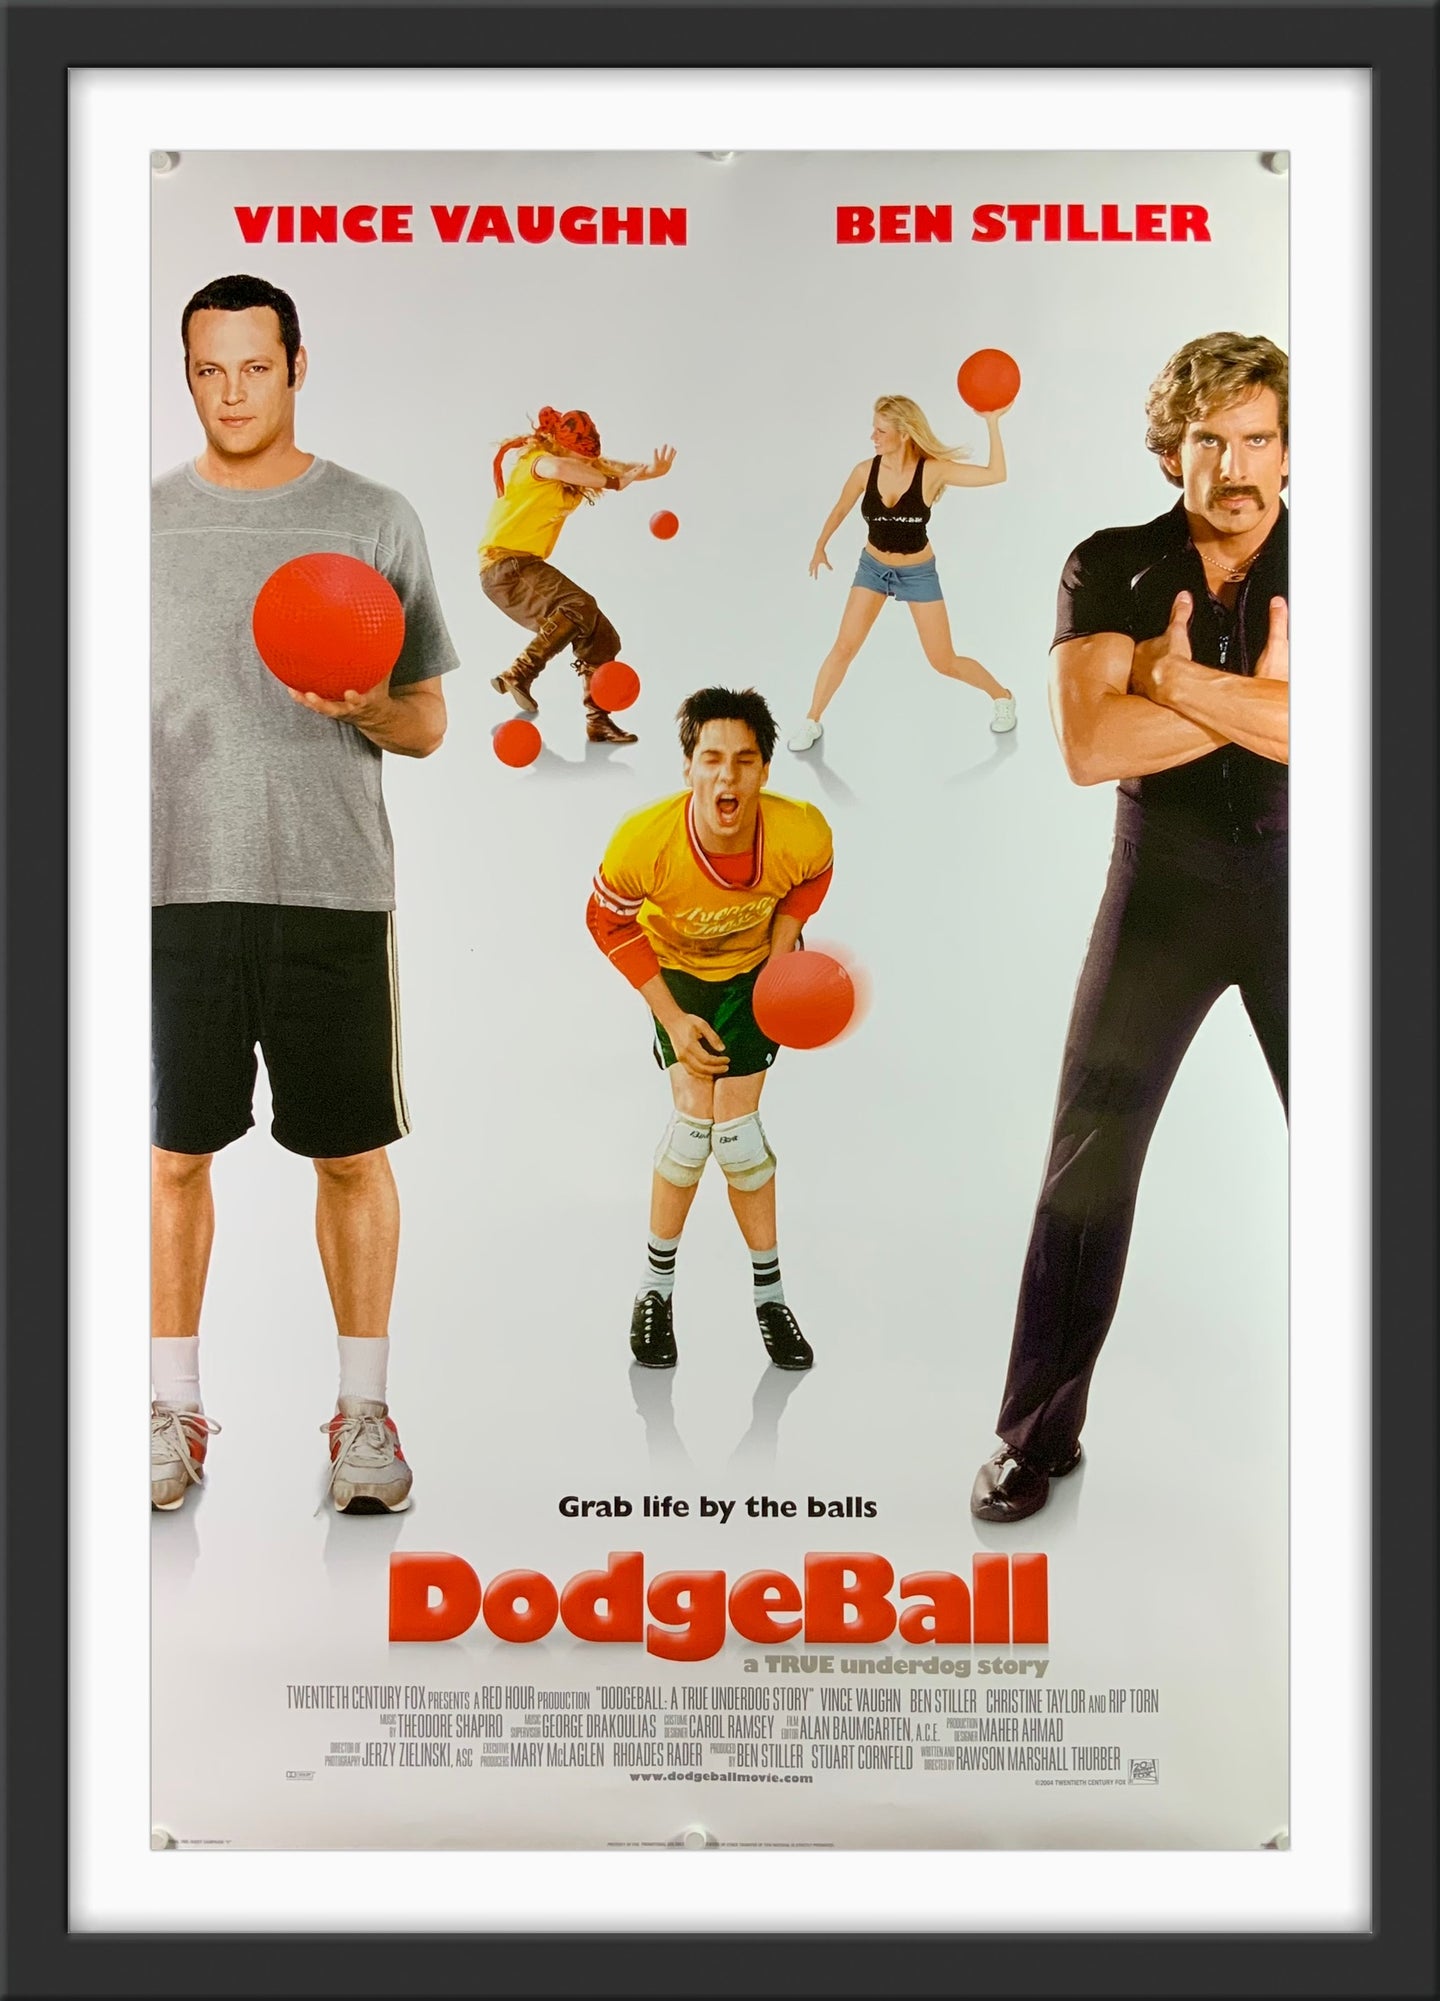 An original one sheet movie poster for the film Dogeball / Dodge Ball